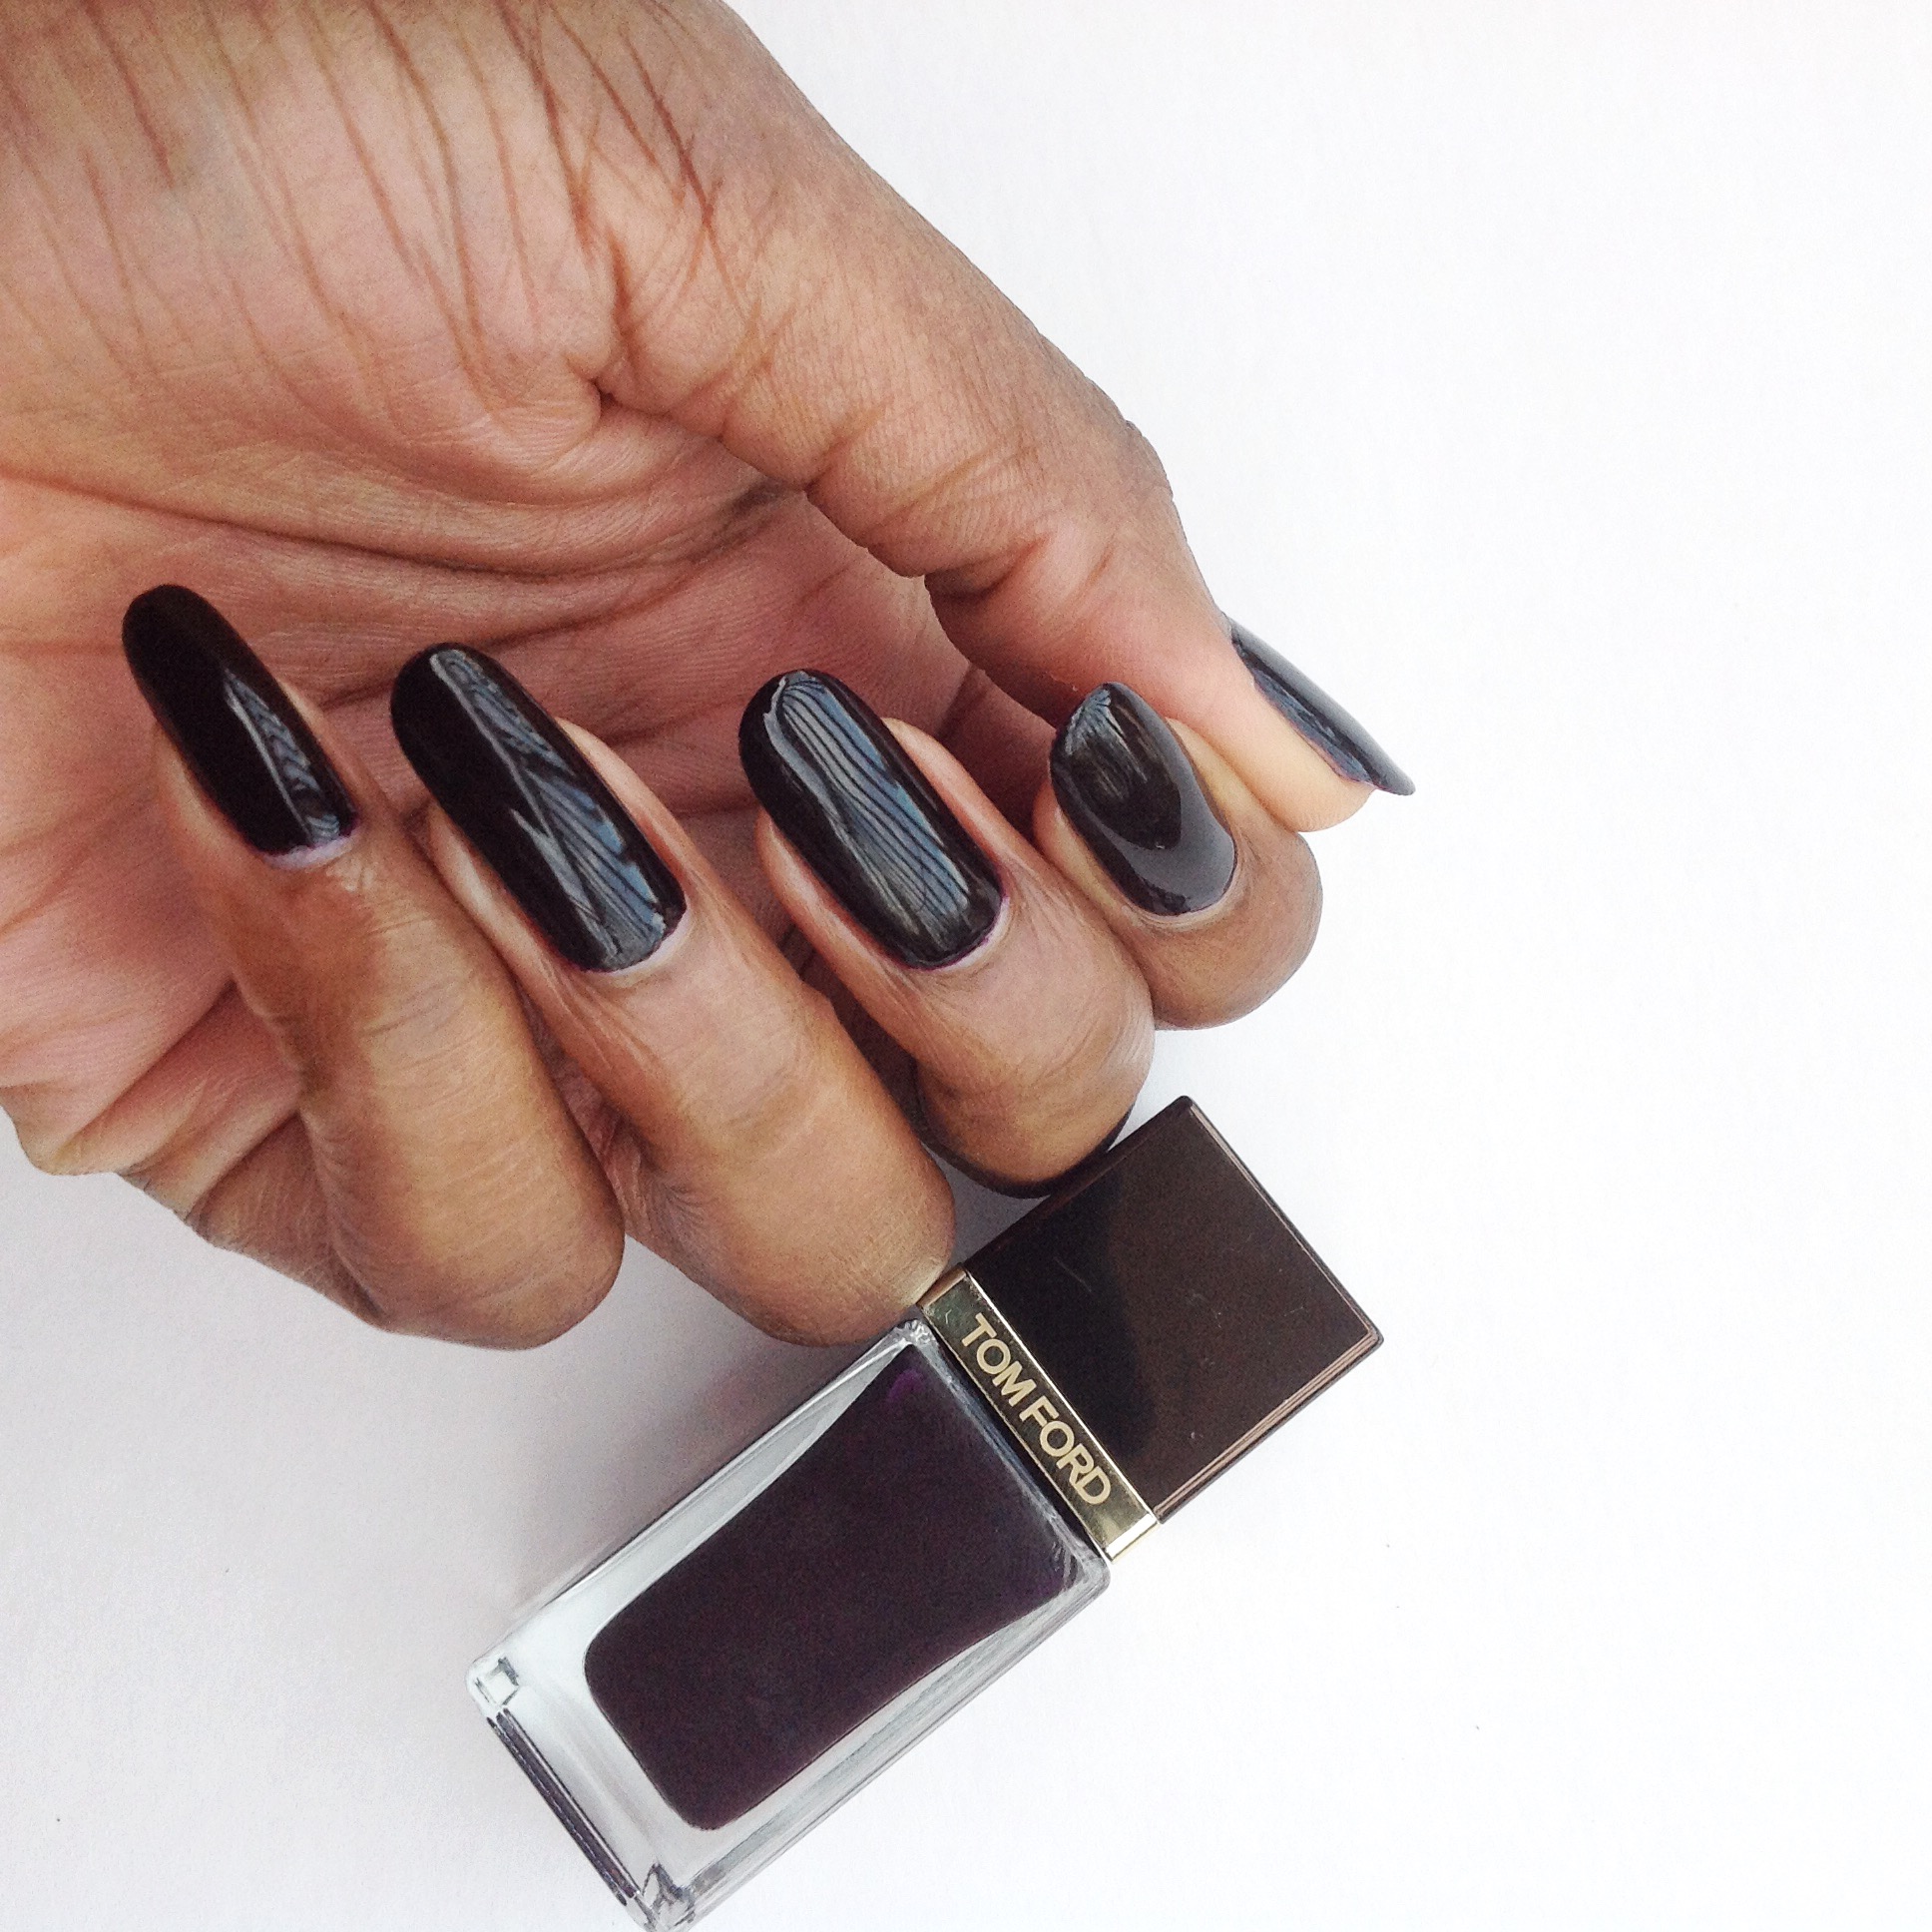 Mani of the Week: Featuring Tom Ford Black Cherry